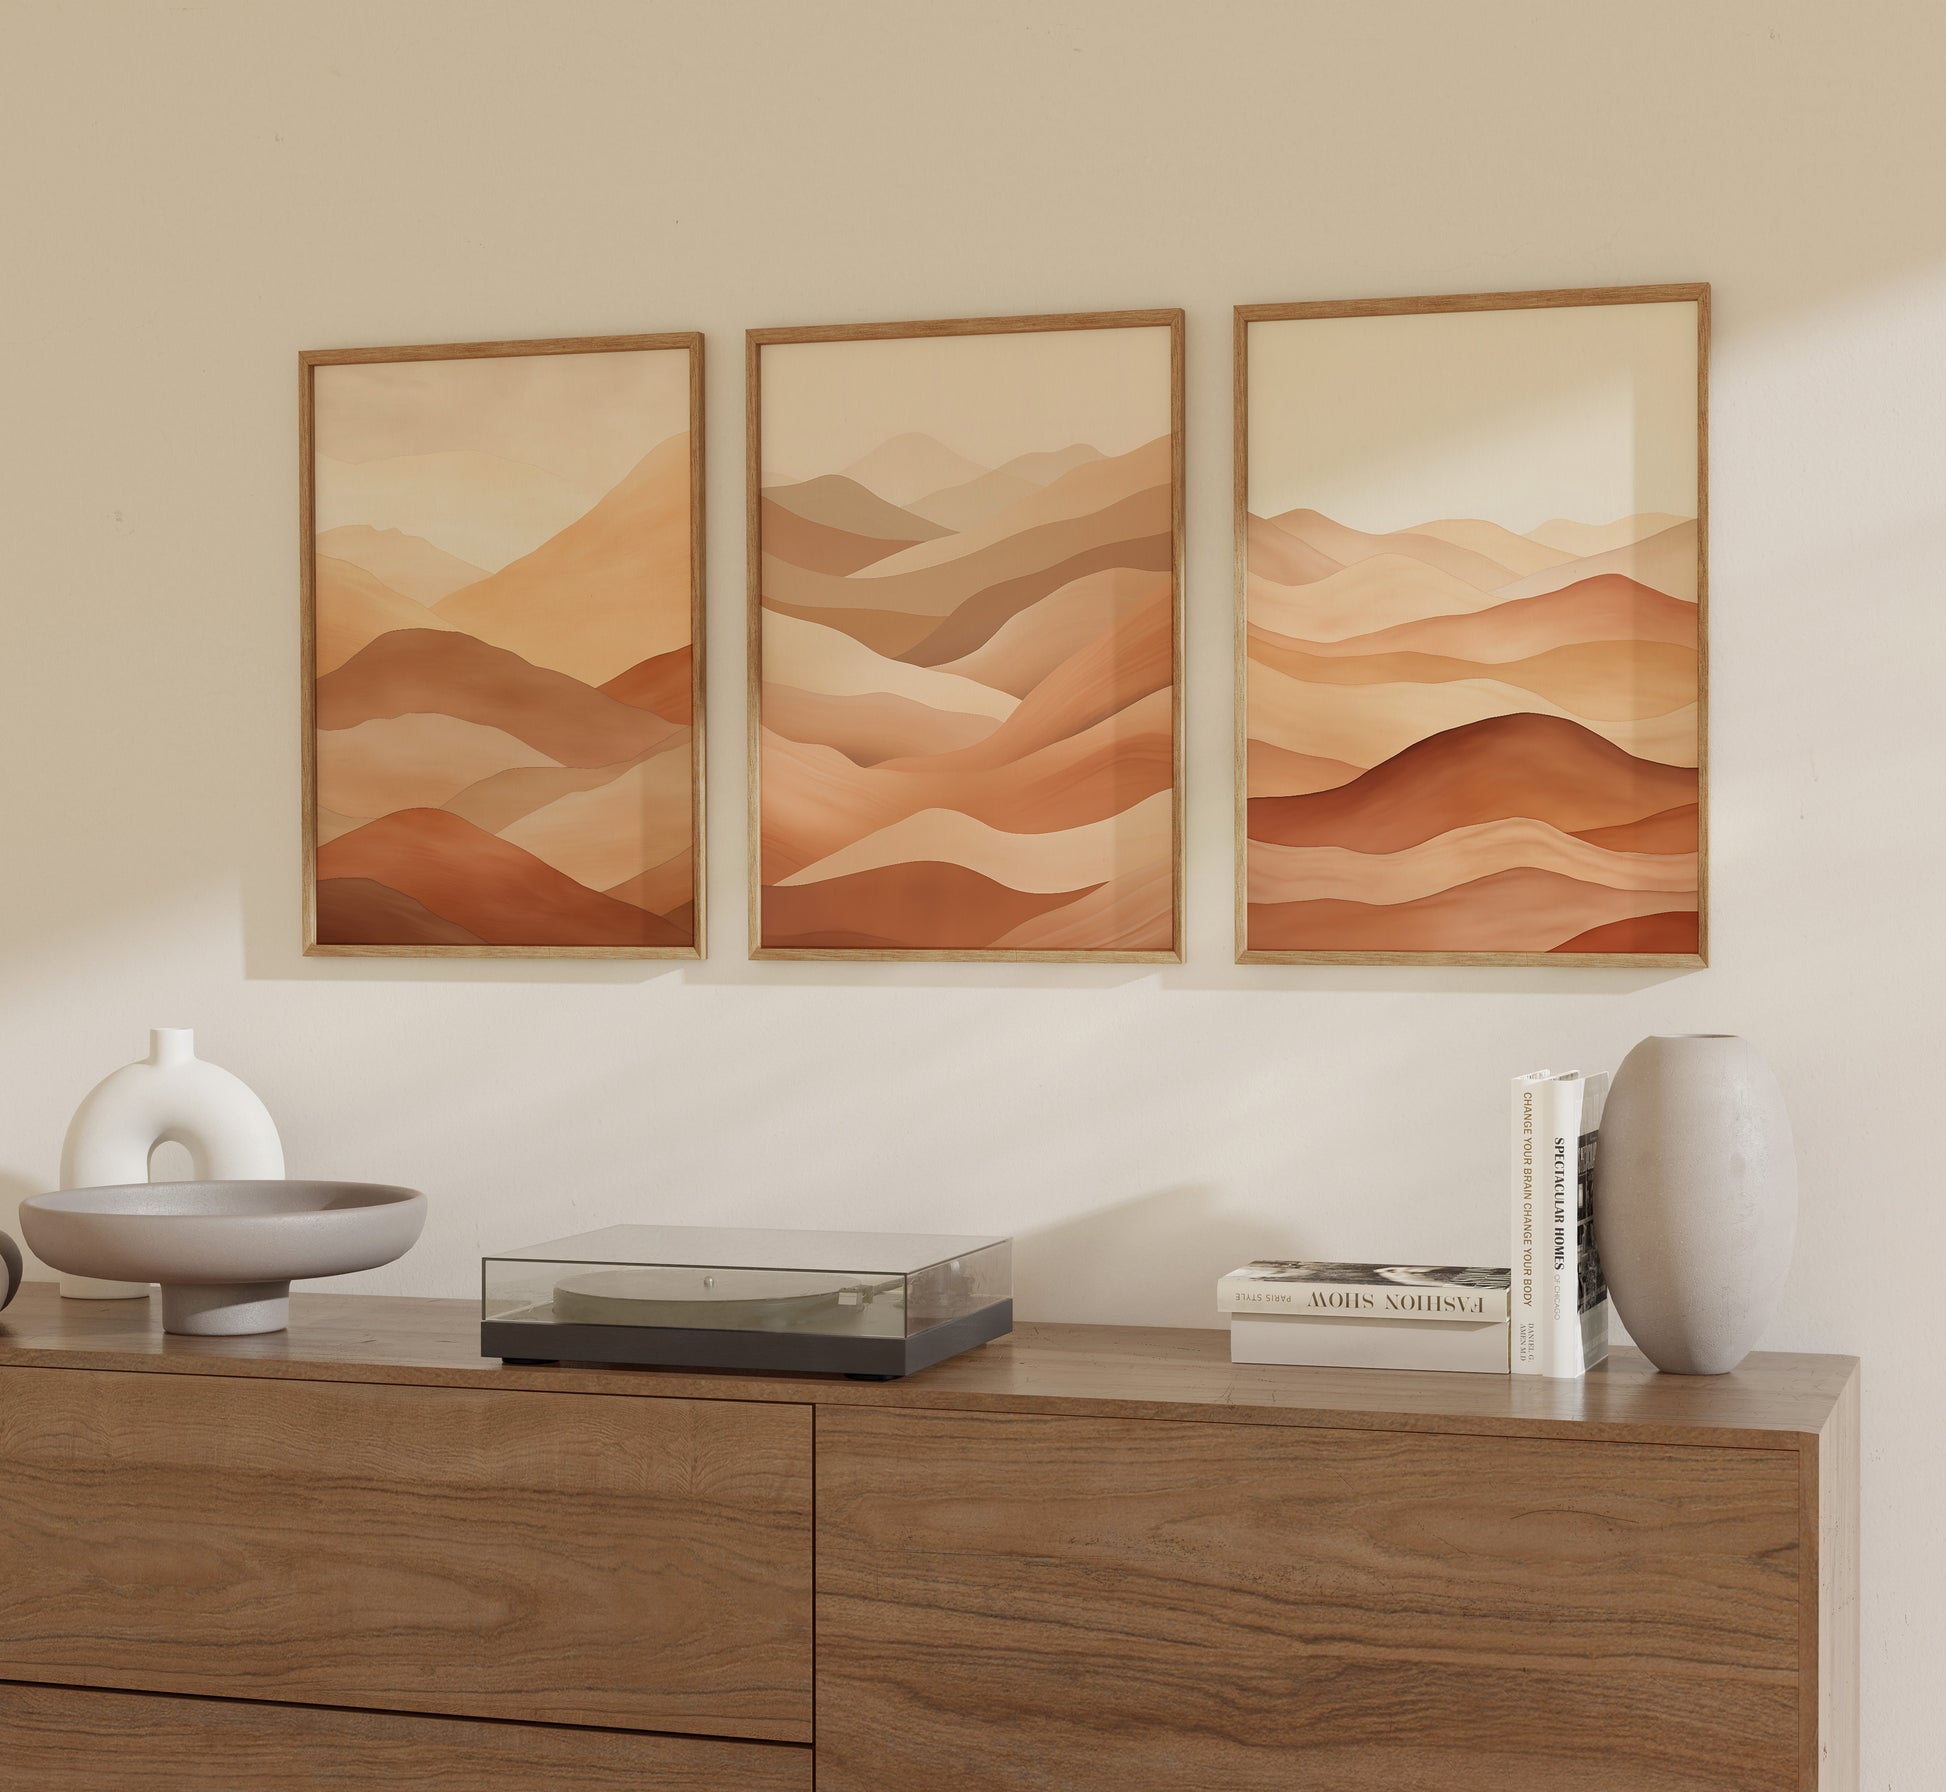 Three framed abstract landscape paintings above a wooden sideboard with decorative items.